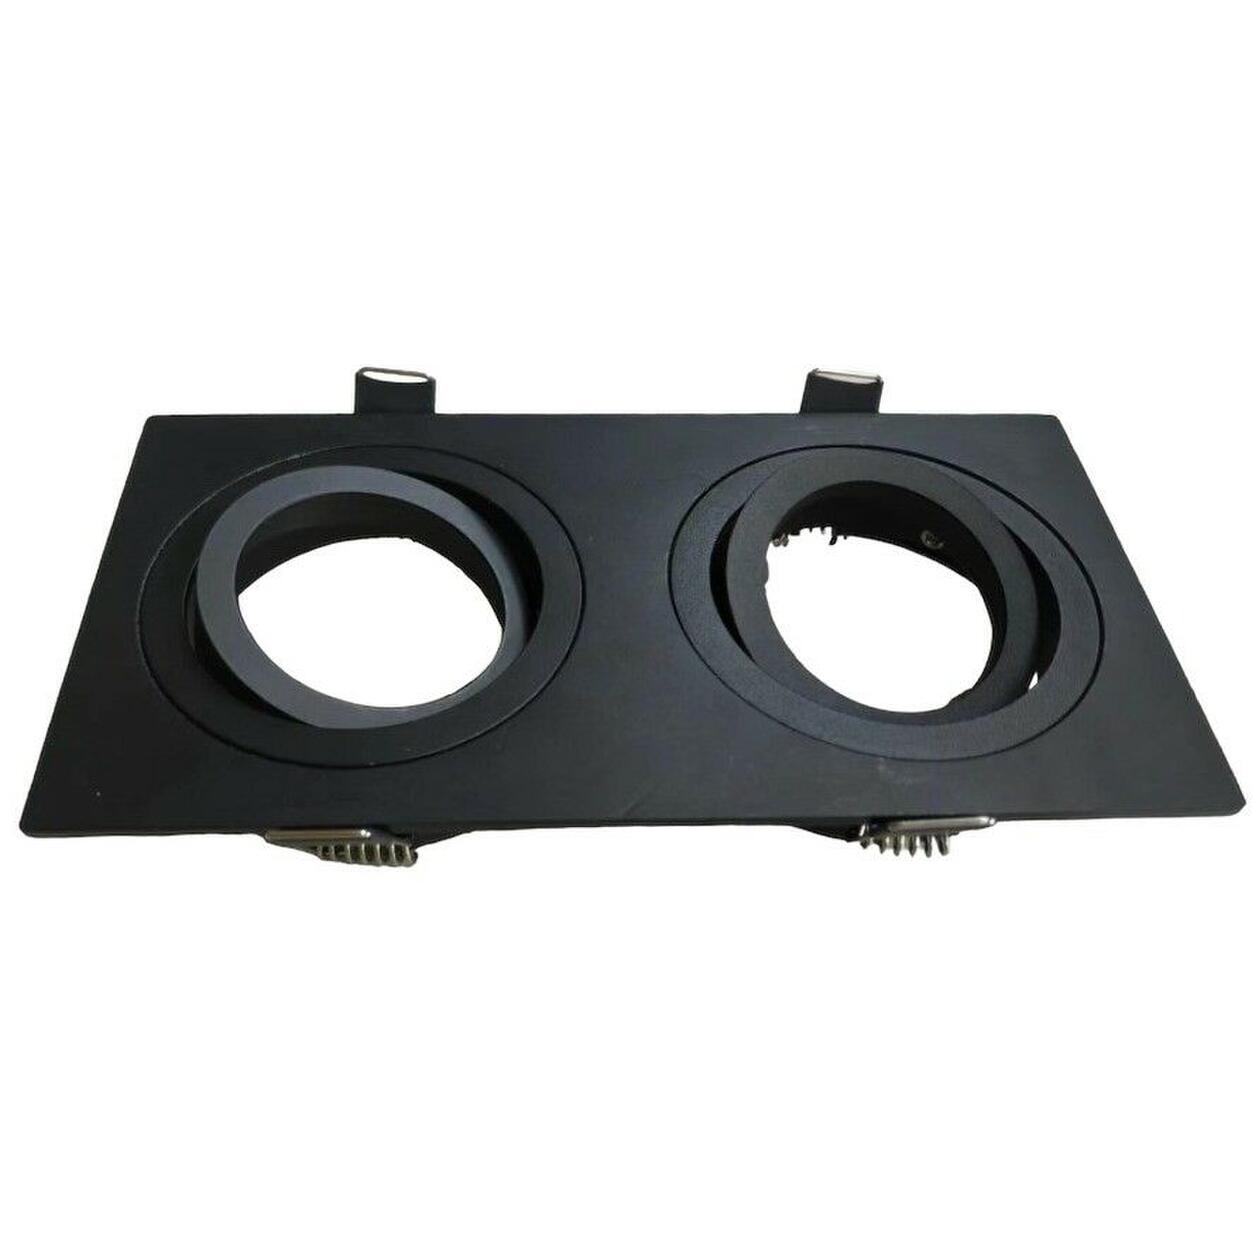 Recessed Double Mounting Ring 2x GU10/MR16 Adjustable Black